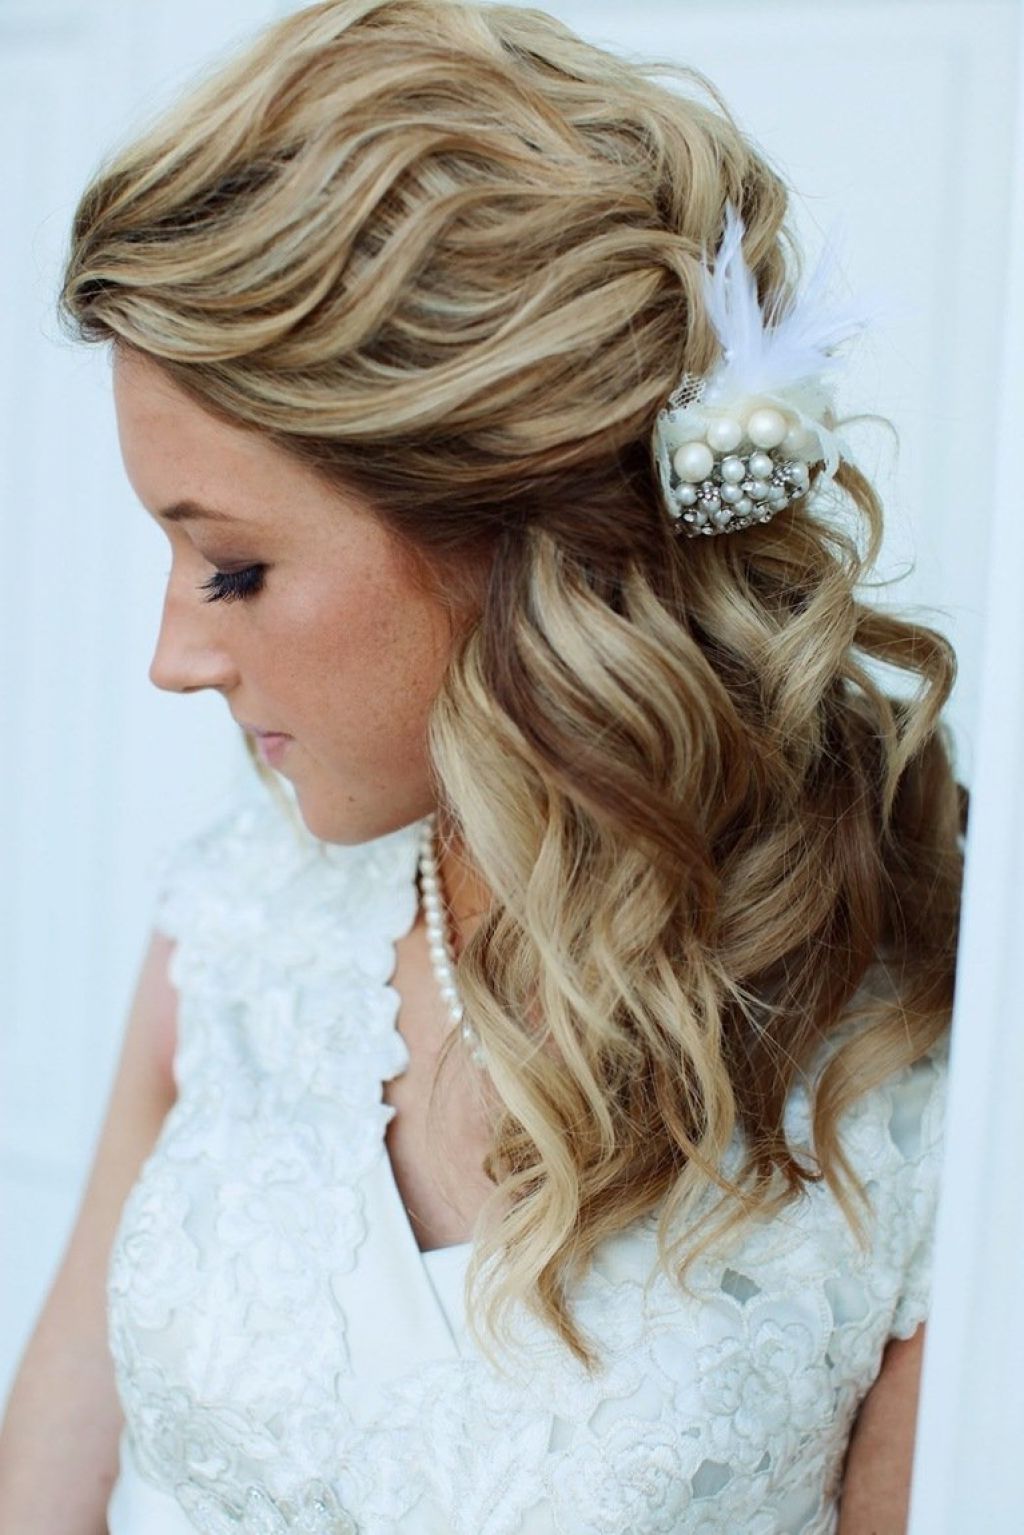 √ 24+ Awesome Wedding Hairstyles For Shoulder Length Hair: Cute Throughout Well Liked Wedding Hairstyles With Medium Length Hair (View 3 of 15)